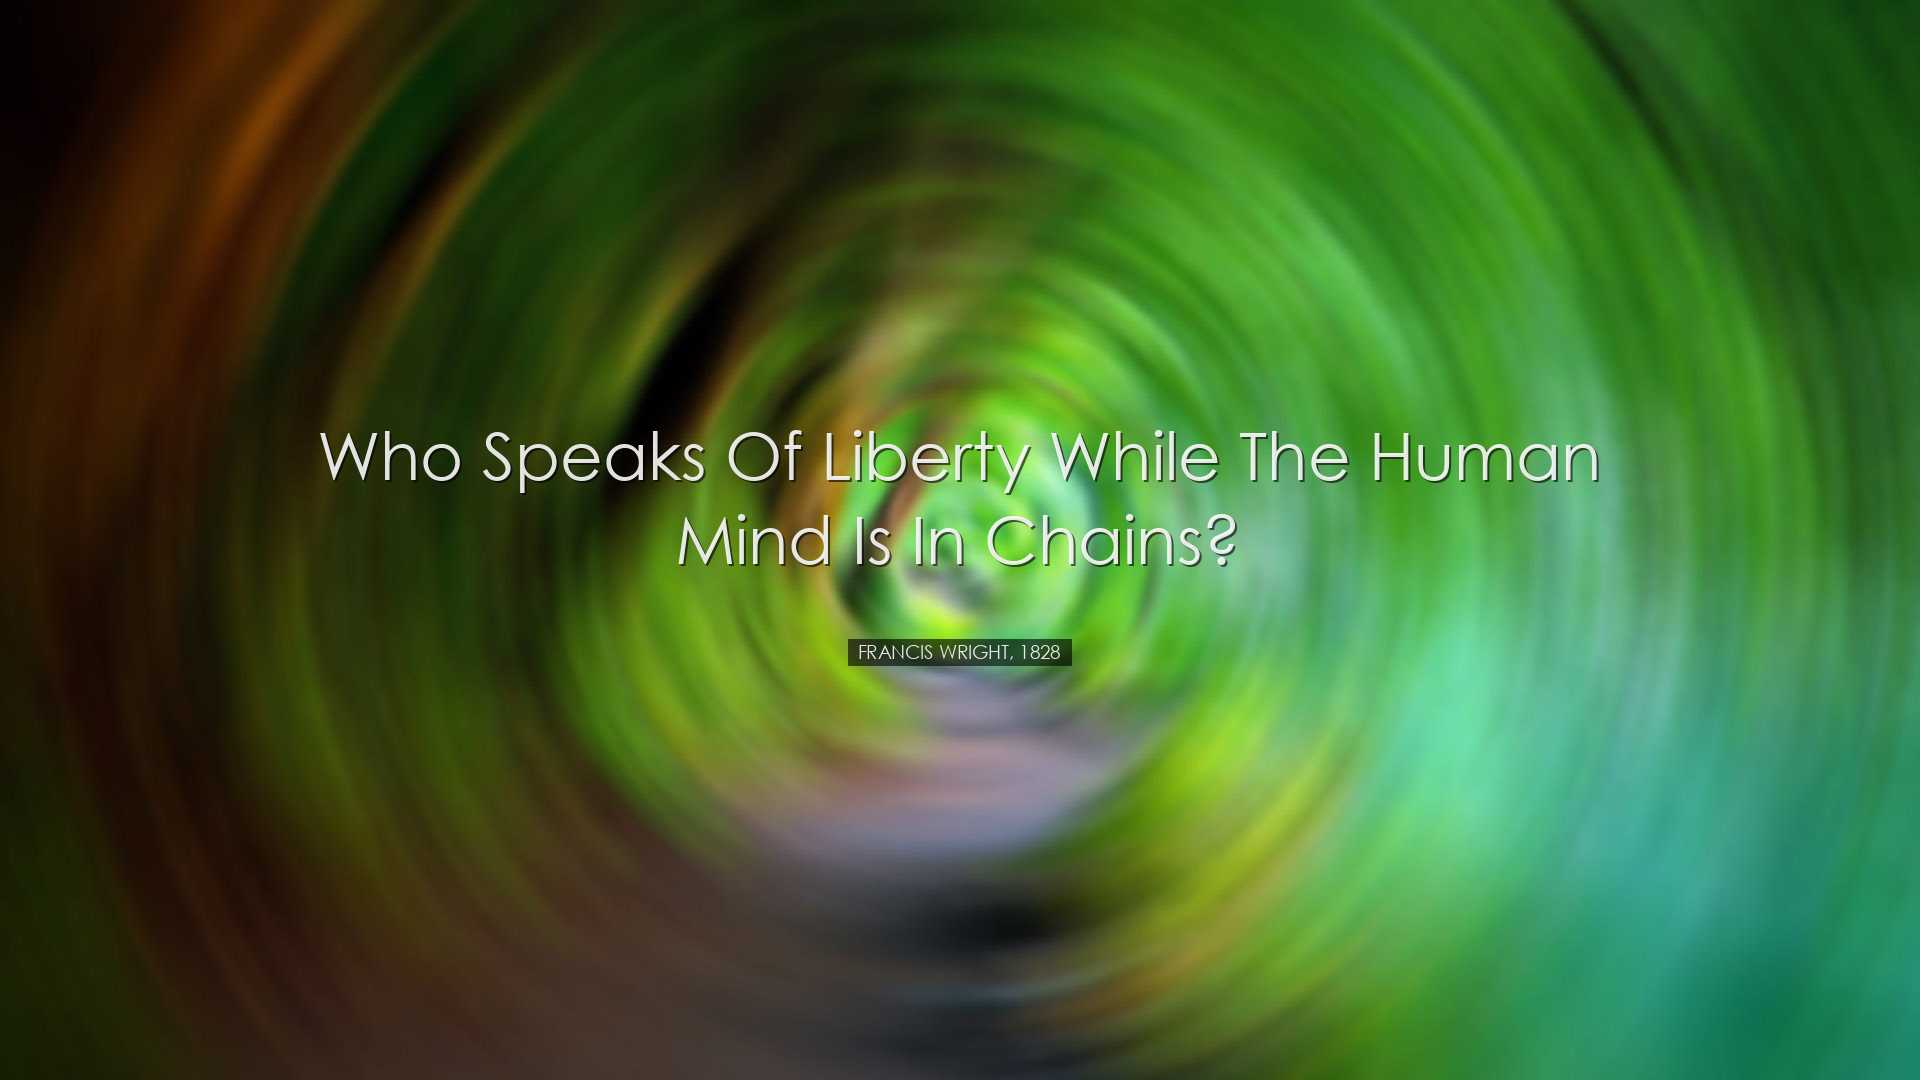 Who speaks of liberty while the human mind is in chains? - Francis